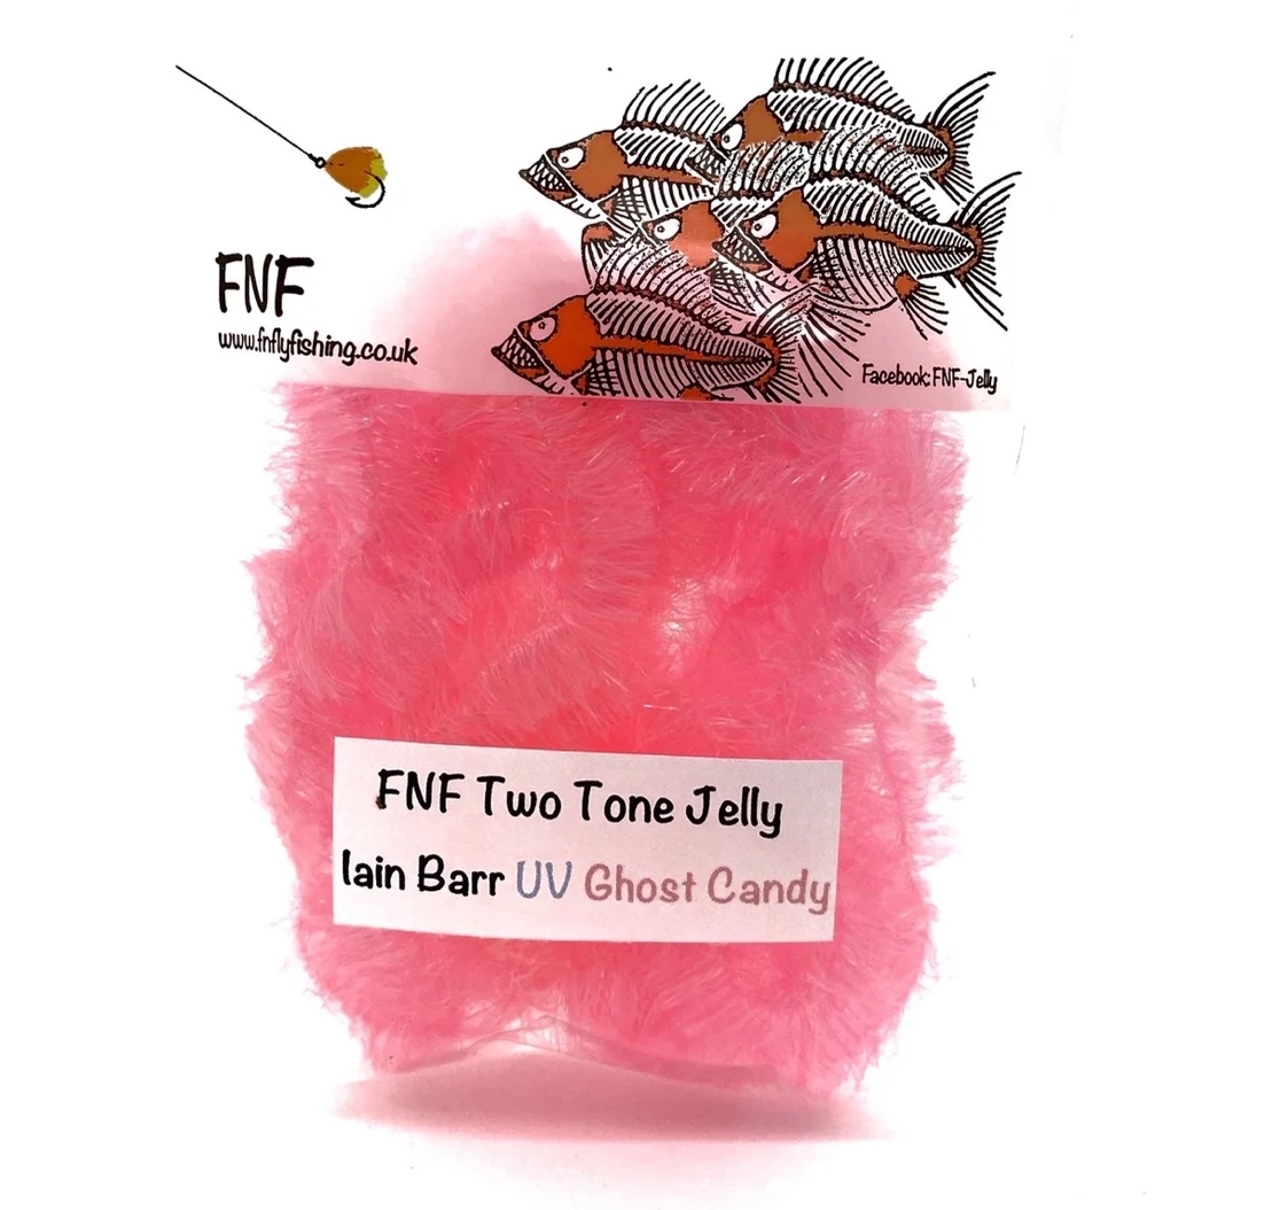 FNF Two Tone Jelly - Iain Barr UV Ghost Candy